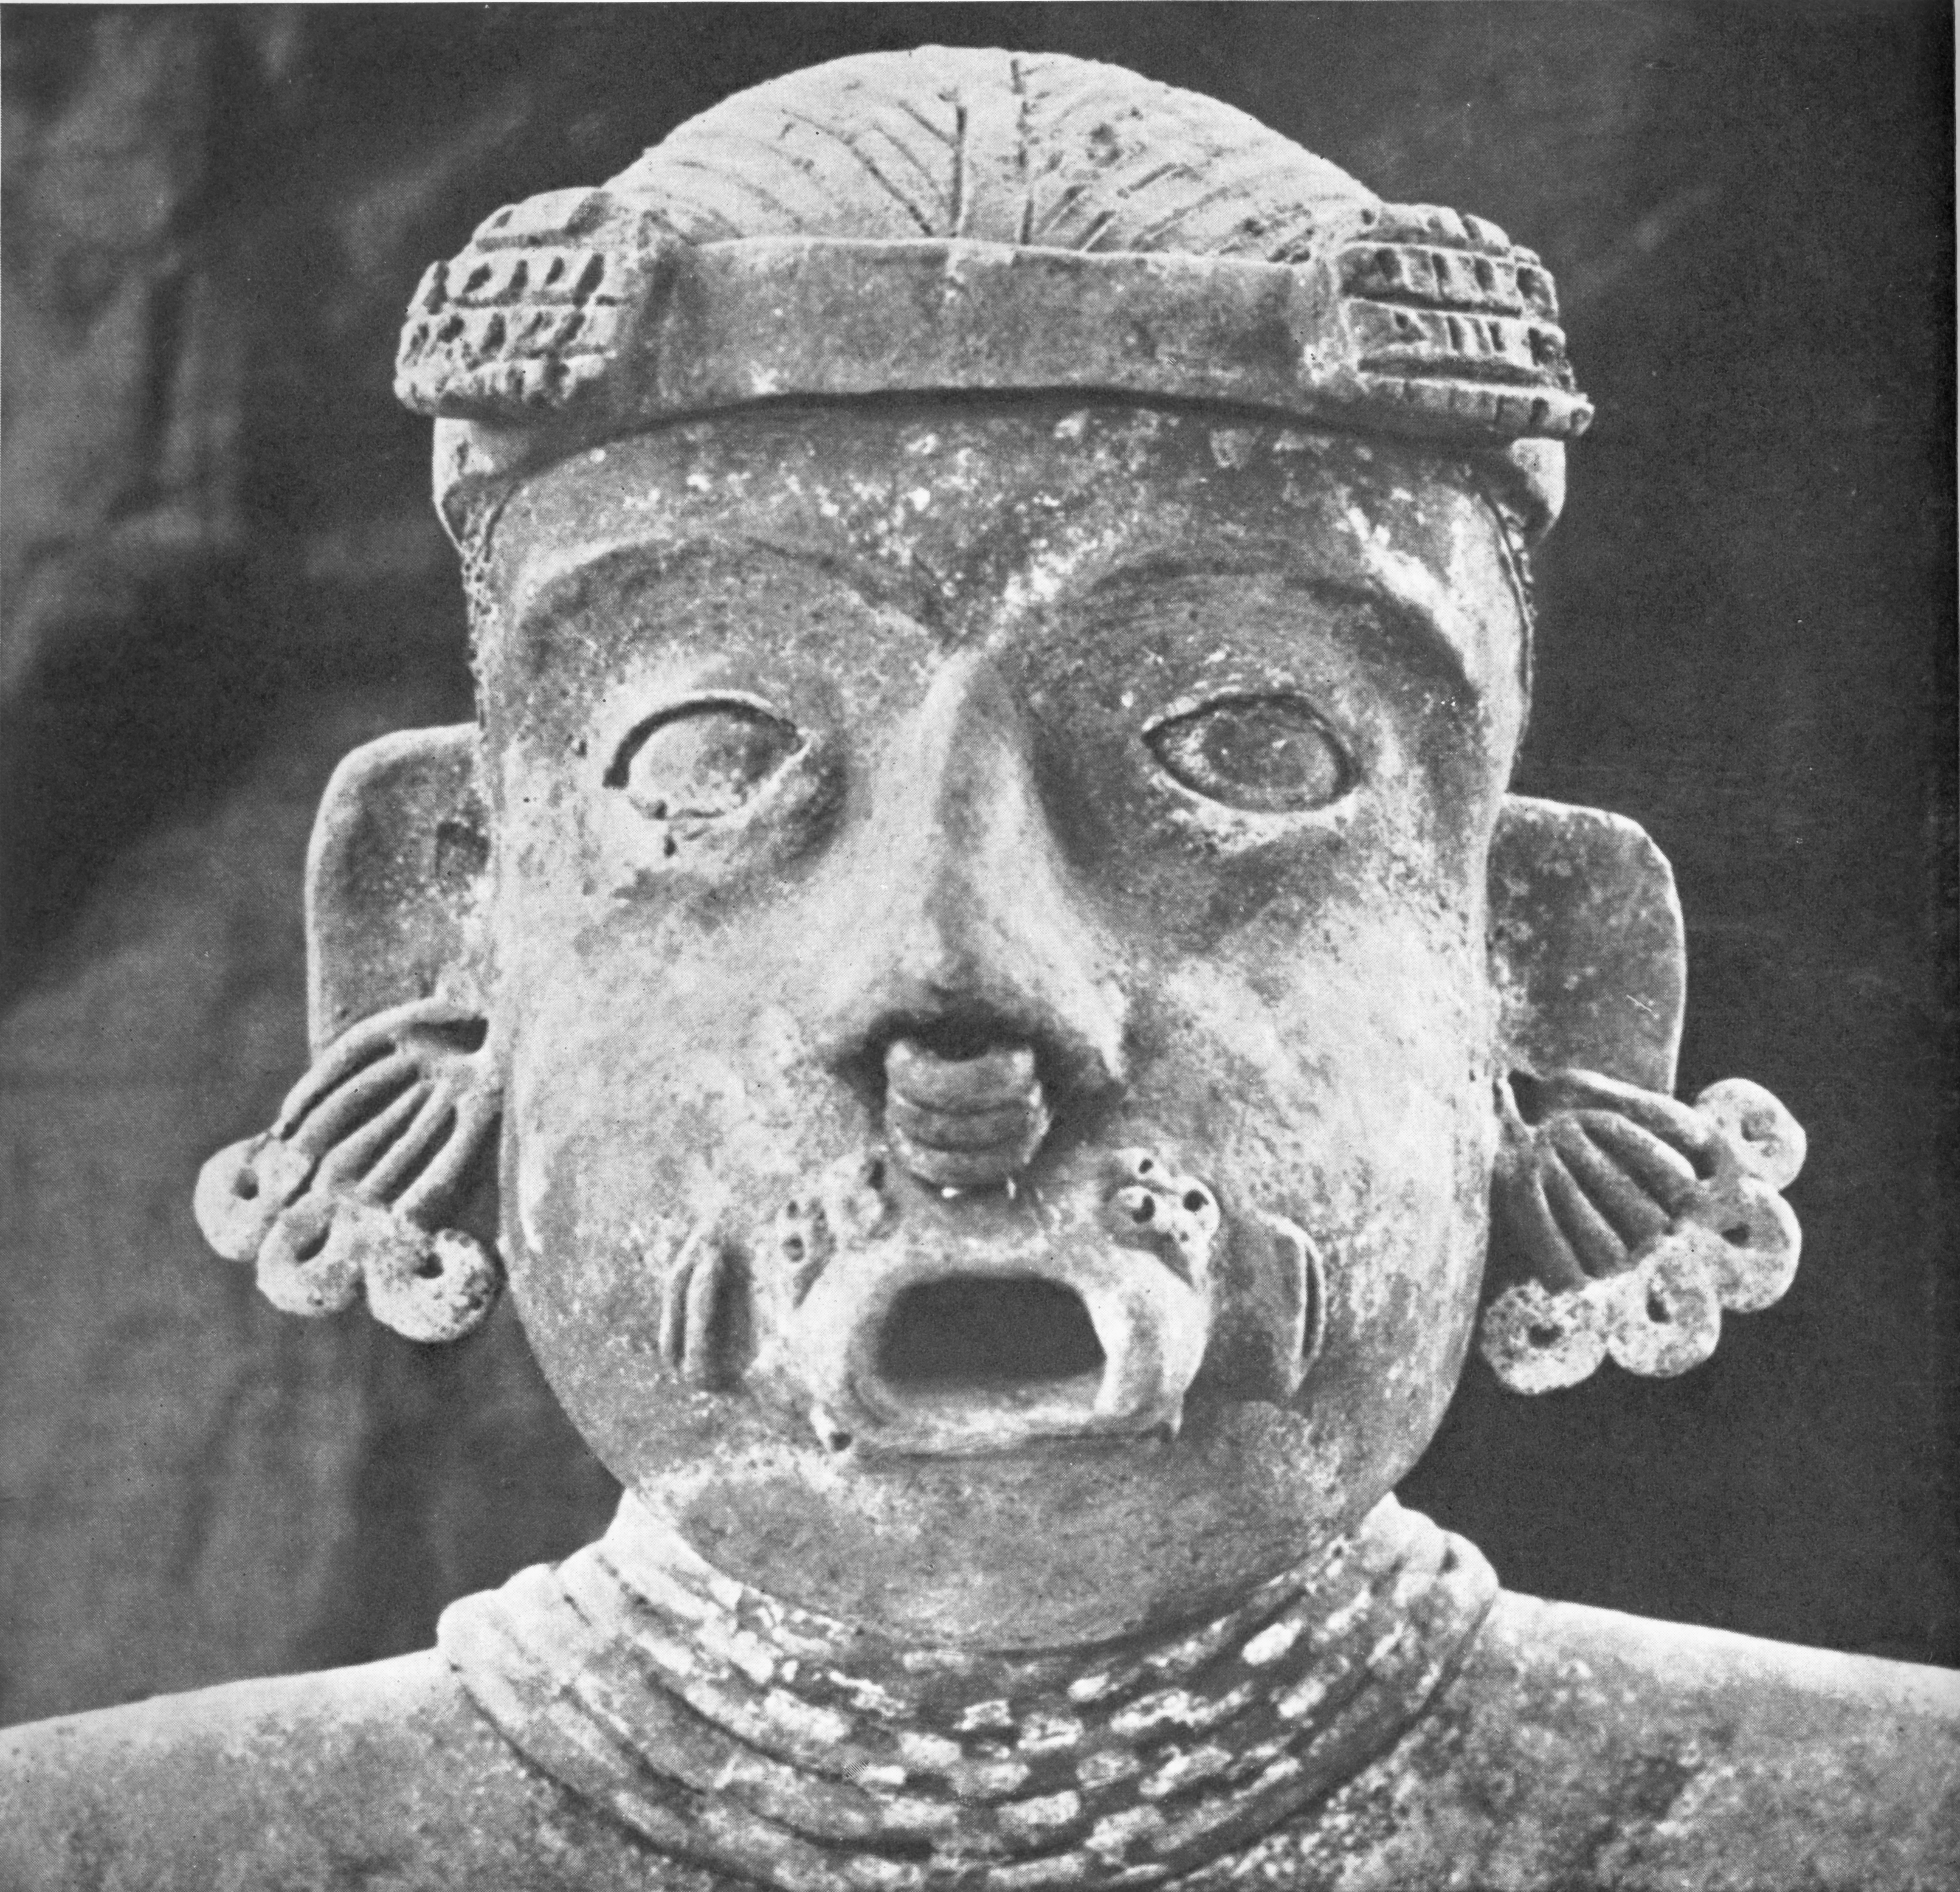 Tomb figure from Western Mexico